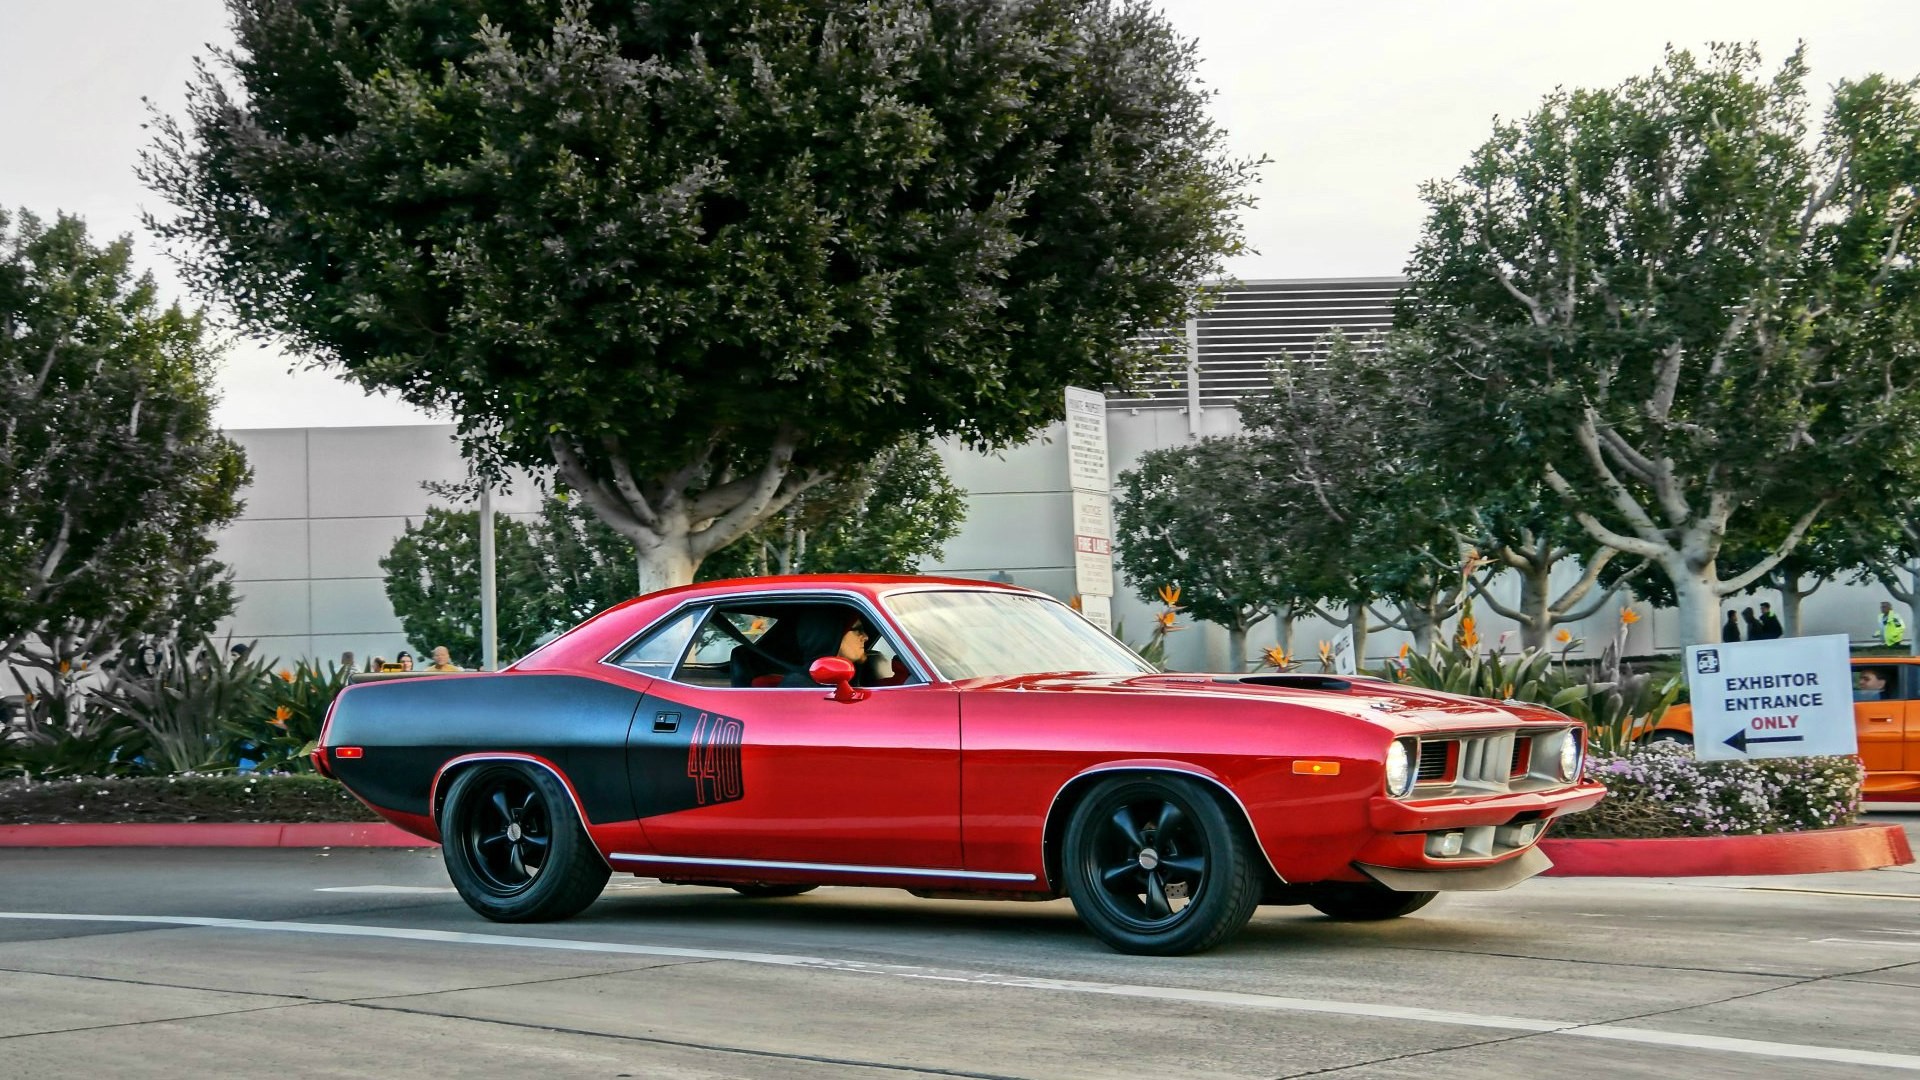 Vehicles Plymouth Barracuda HD Wallpaper | Background Image